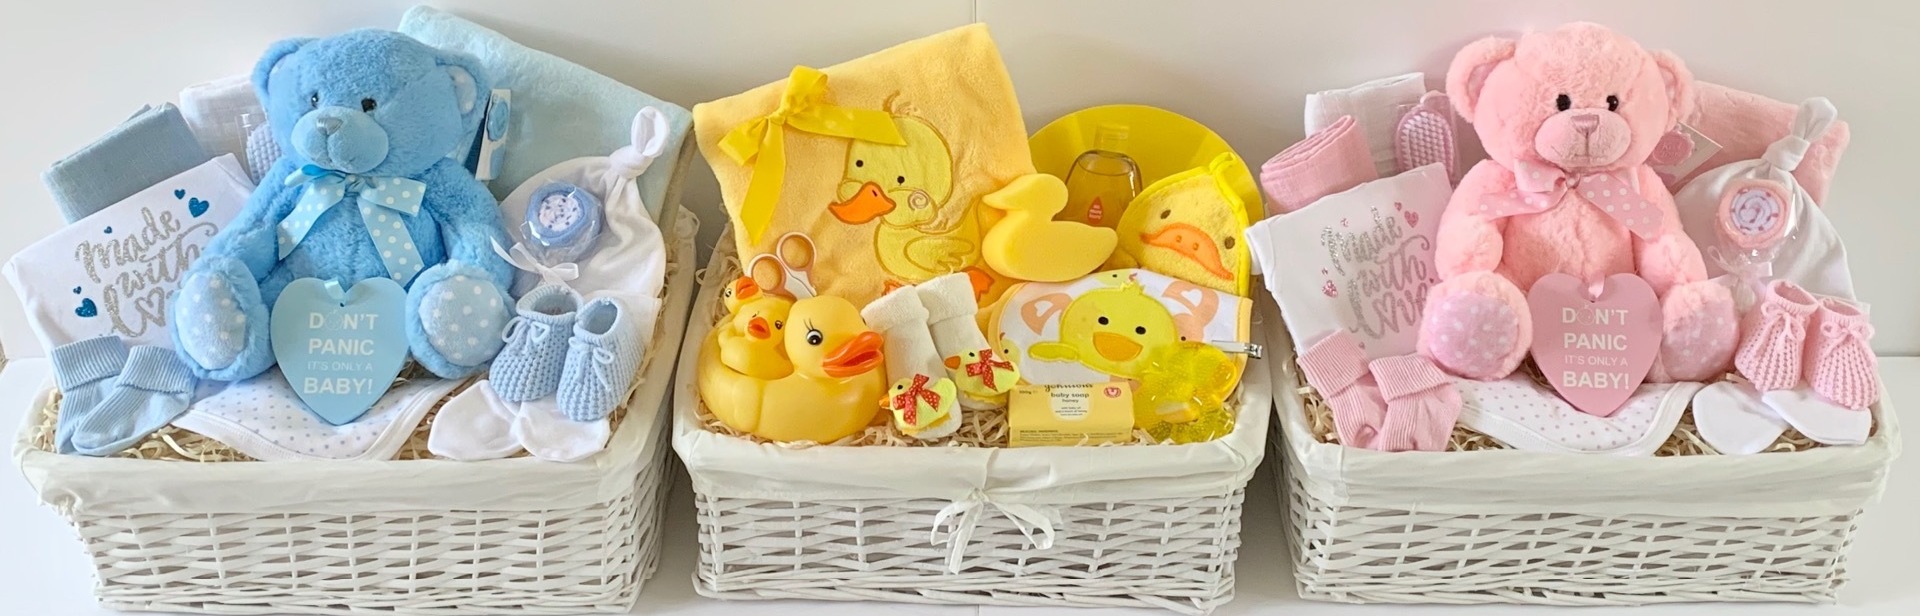 baby gift baskets hampers